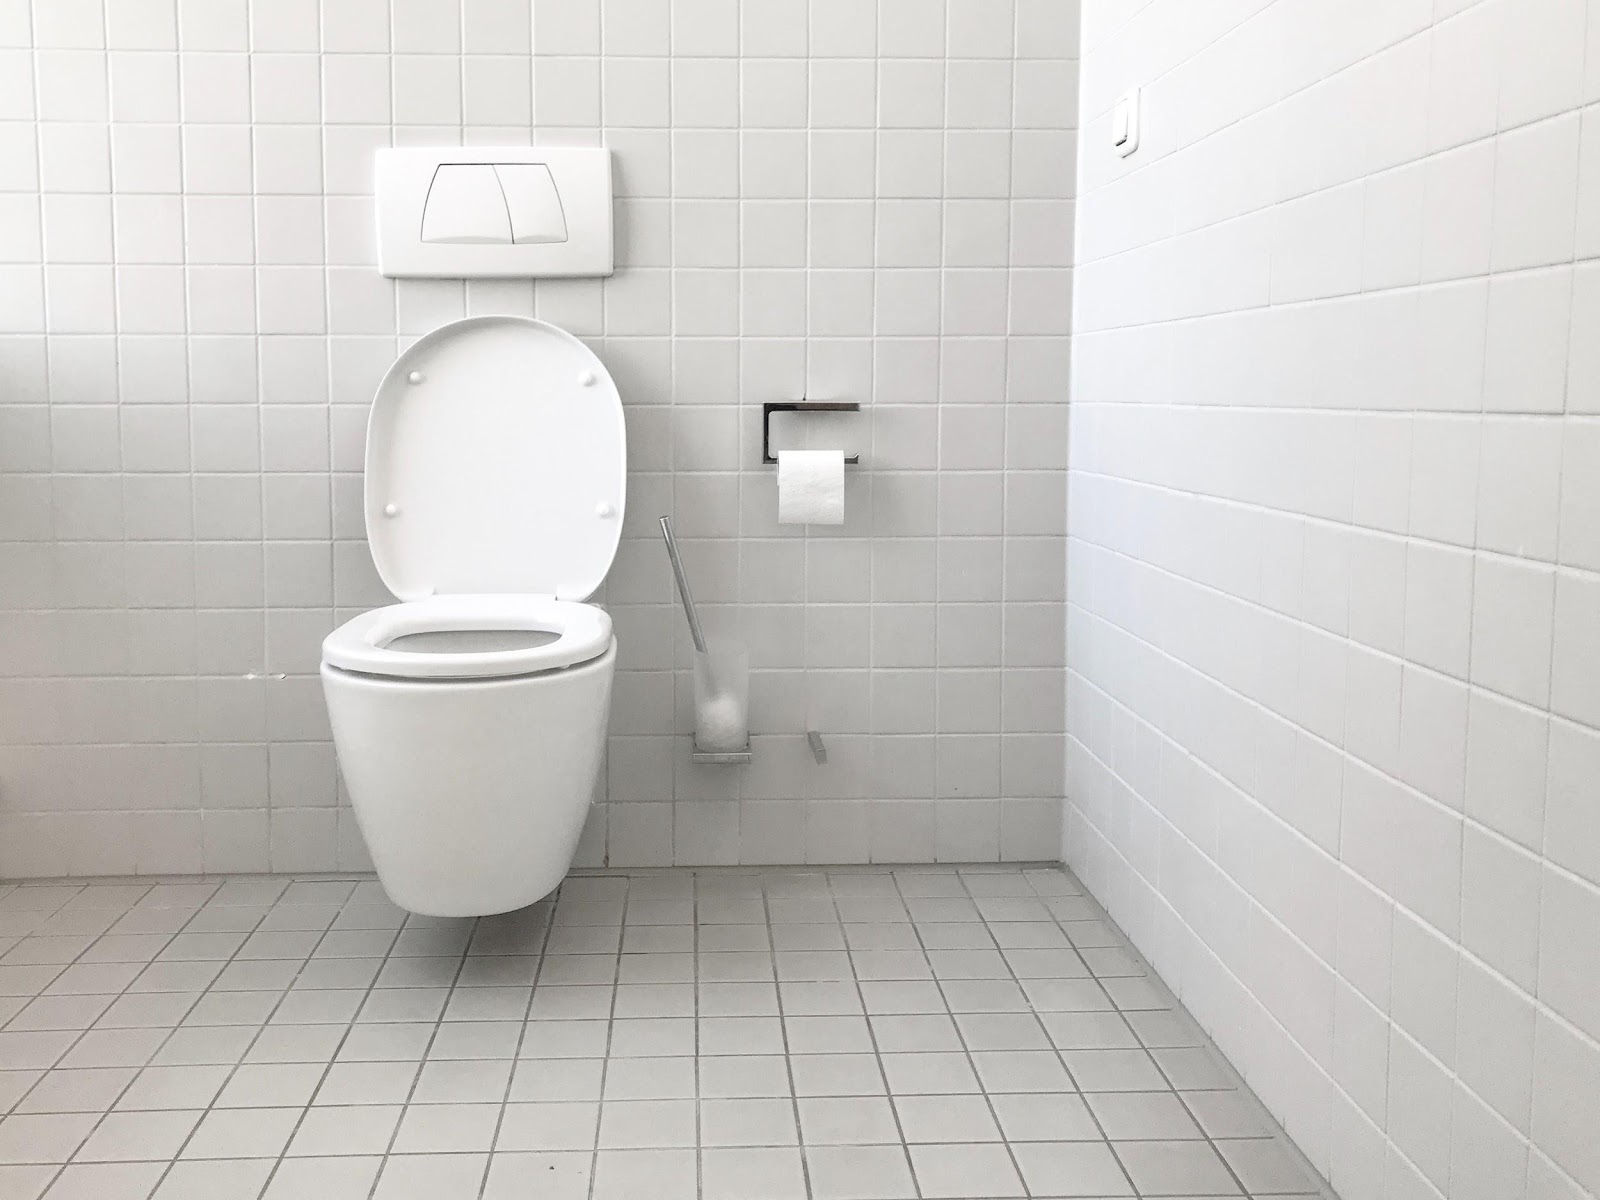 5 Lifestyle Changes that will help with your Urinary Incontinence